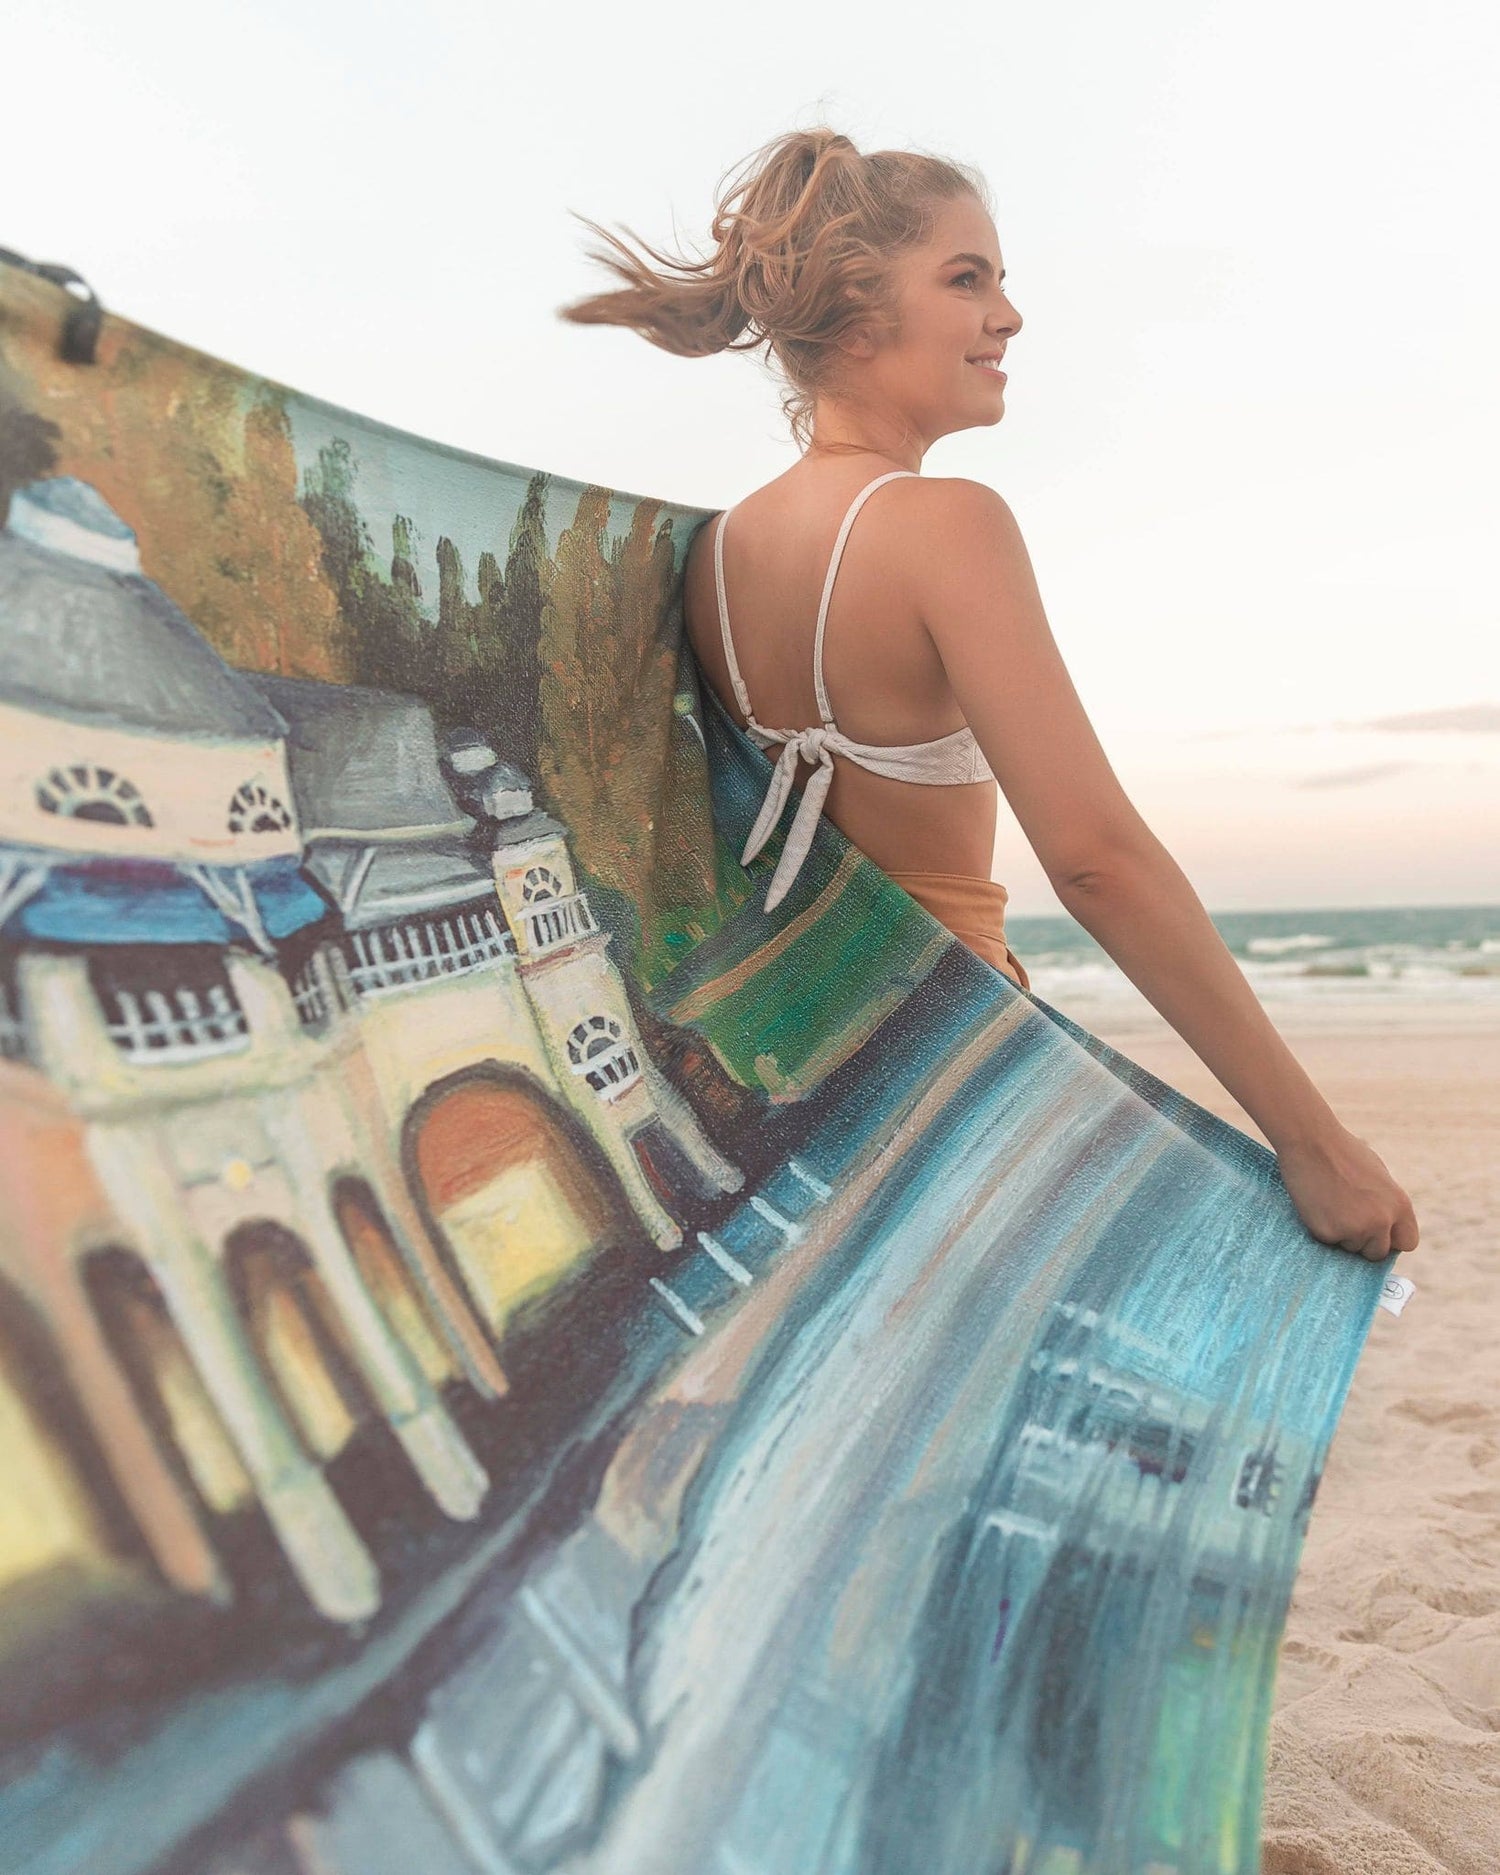 Female model holding Cottesloe Beach microfibre artistic towel. The towel shows the ocean, the Pavilion and trees behind it. Large size, 170cm x 95cm, soft touch, compact and sand free beach towel. An Aussie-inspired art showcasing magnificent landmarks and the Aussie lifestyle